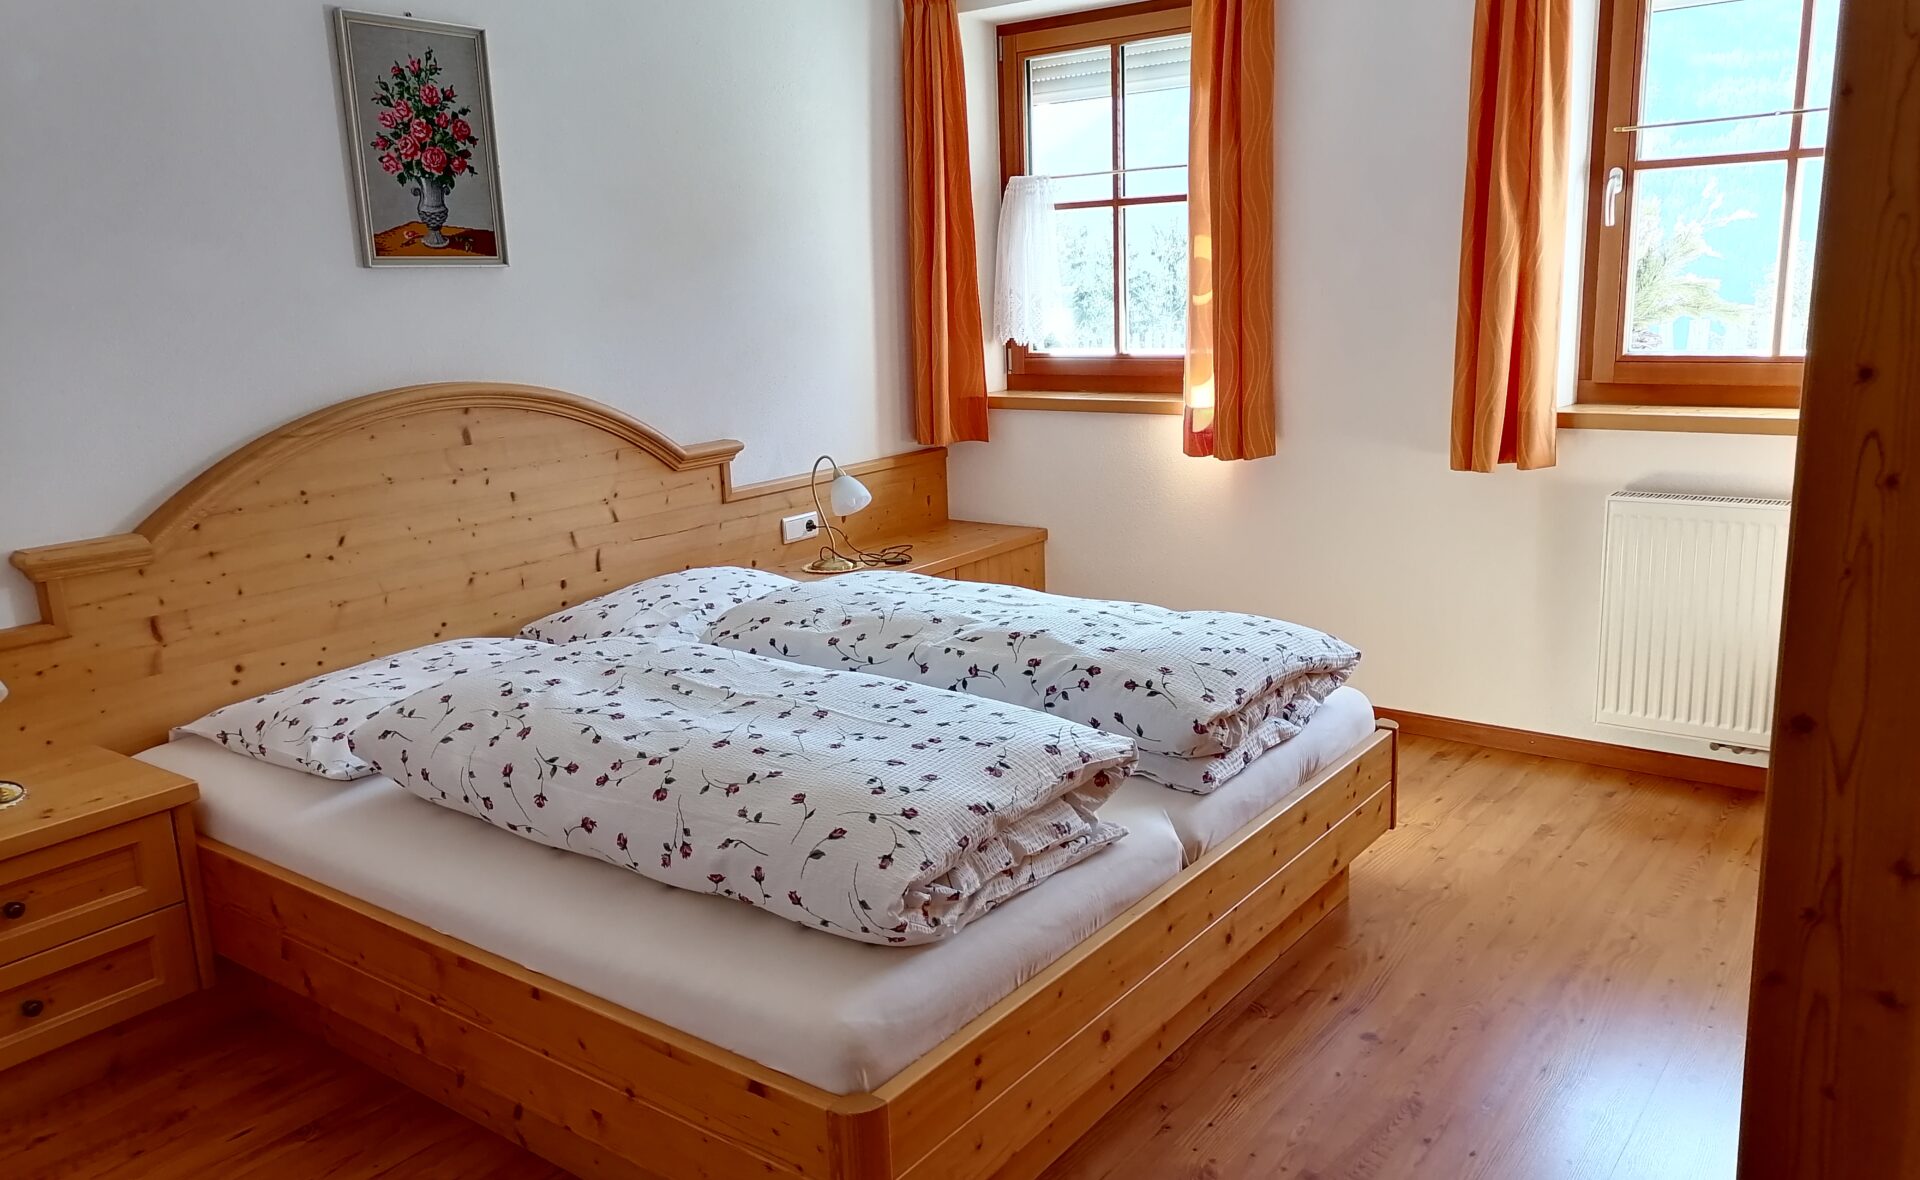 Double bed room from the apartment "Waldruhe"